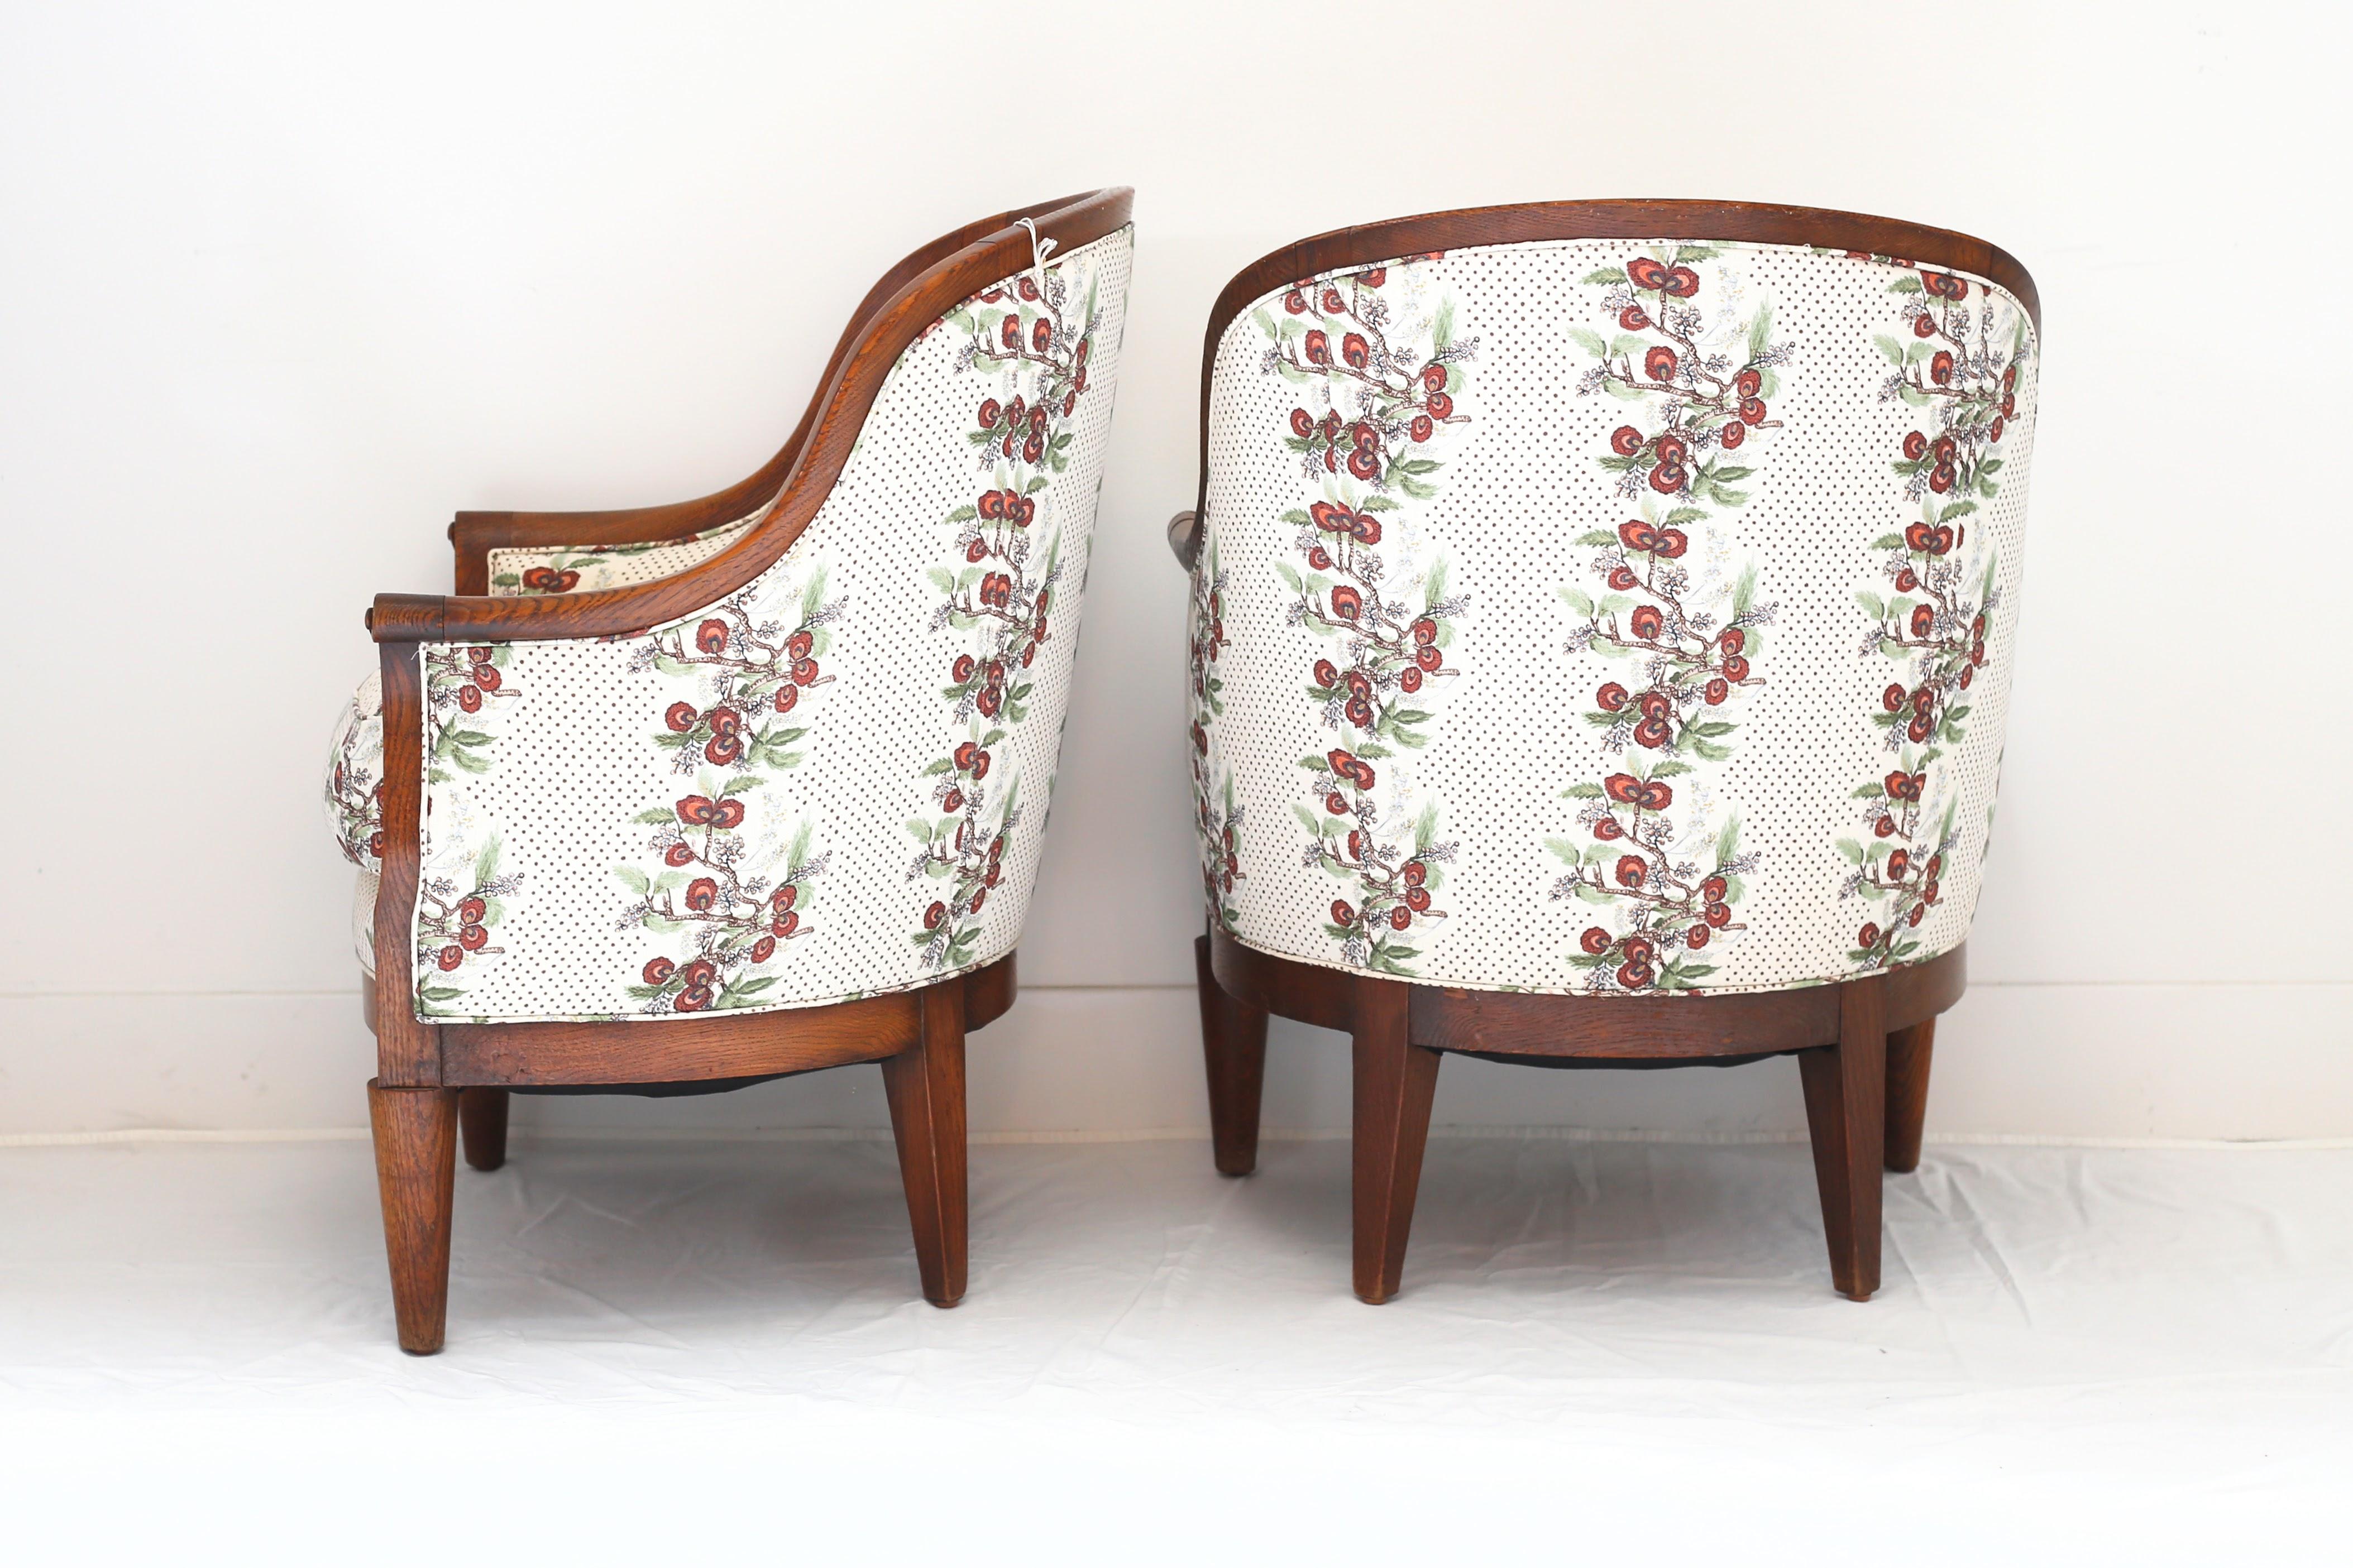 Pair of Vintage deco oak armchairs, newly upholstered in Ferrick Mason.
FRN793.